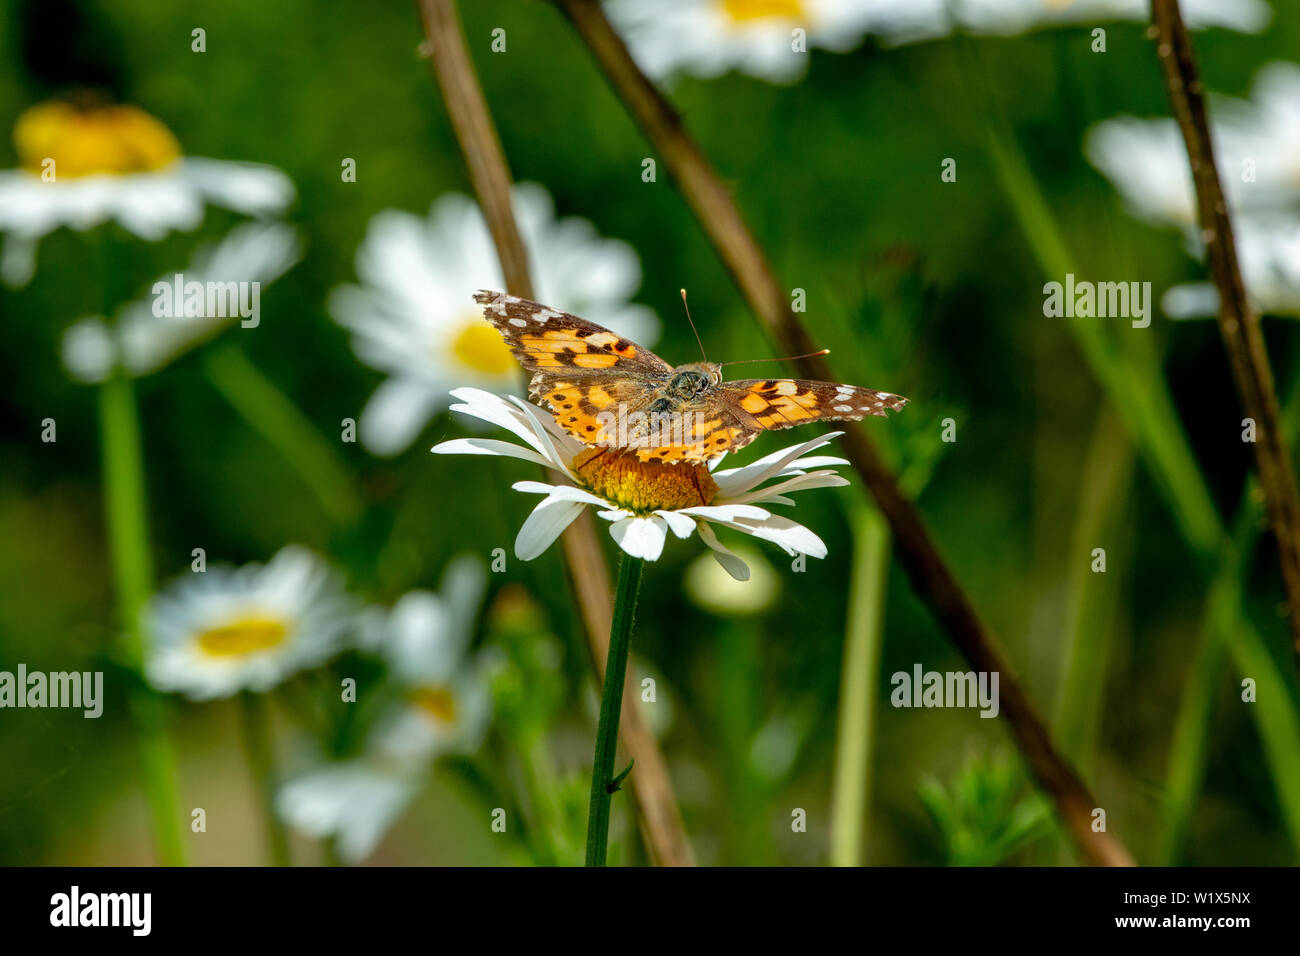 Painted Lady Butterfly (Vanessa cardui), feeding from an Ox-eye Daisy flower (Leucanthemum sp.). Tattered wing tips, general loss of colour, would suggest this is a recent arrival migrant to England from Africa. Stock Photo